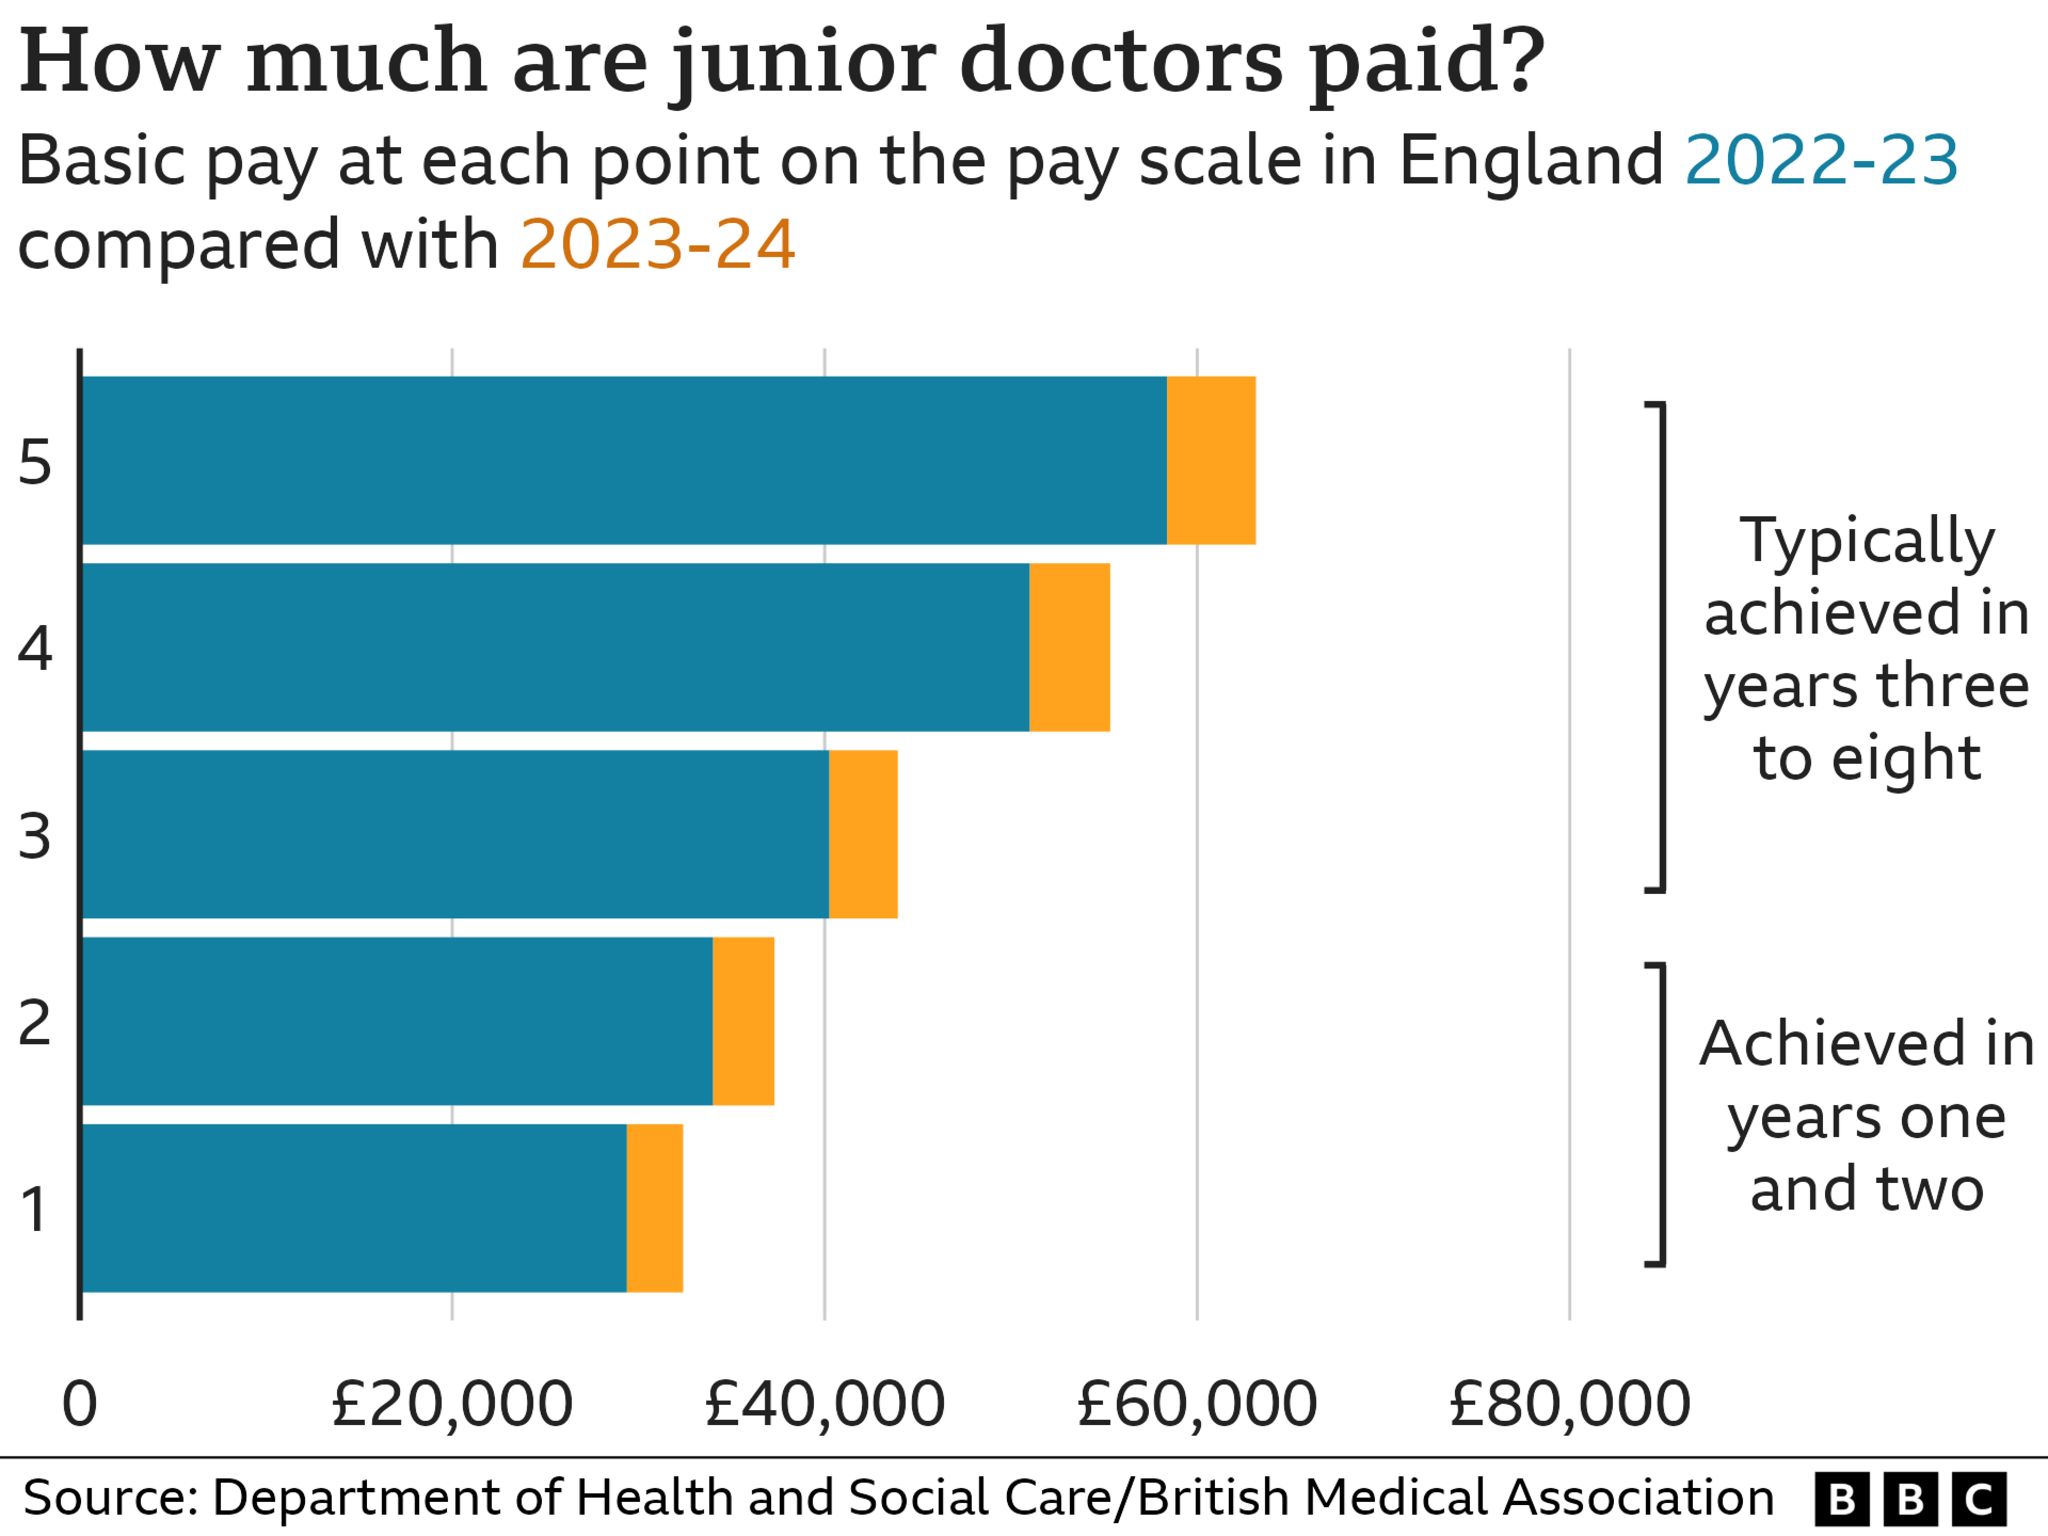 Chart showing junior doctors basic pay at each point on the pay scale in England showing pay is 6% plus £1,250 higher in 2023-24 compared with 2022-23; starting at £32,398 for those on the bottom rung of the pay scale moving up to £63,152 for those on the top level.